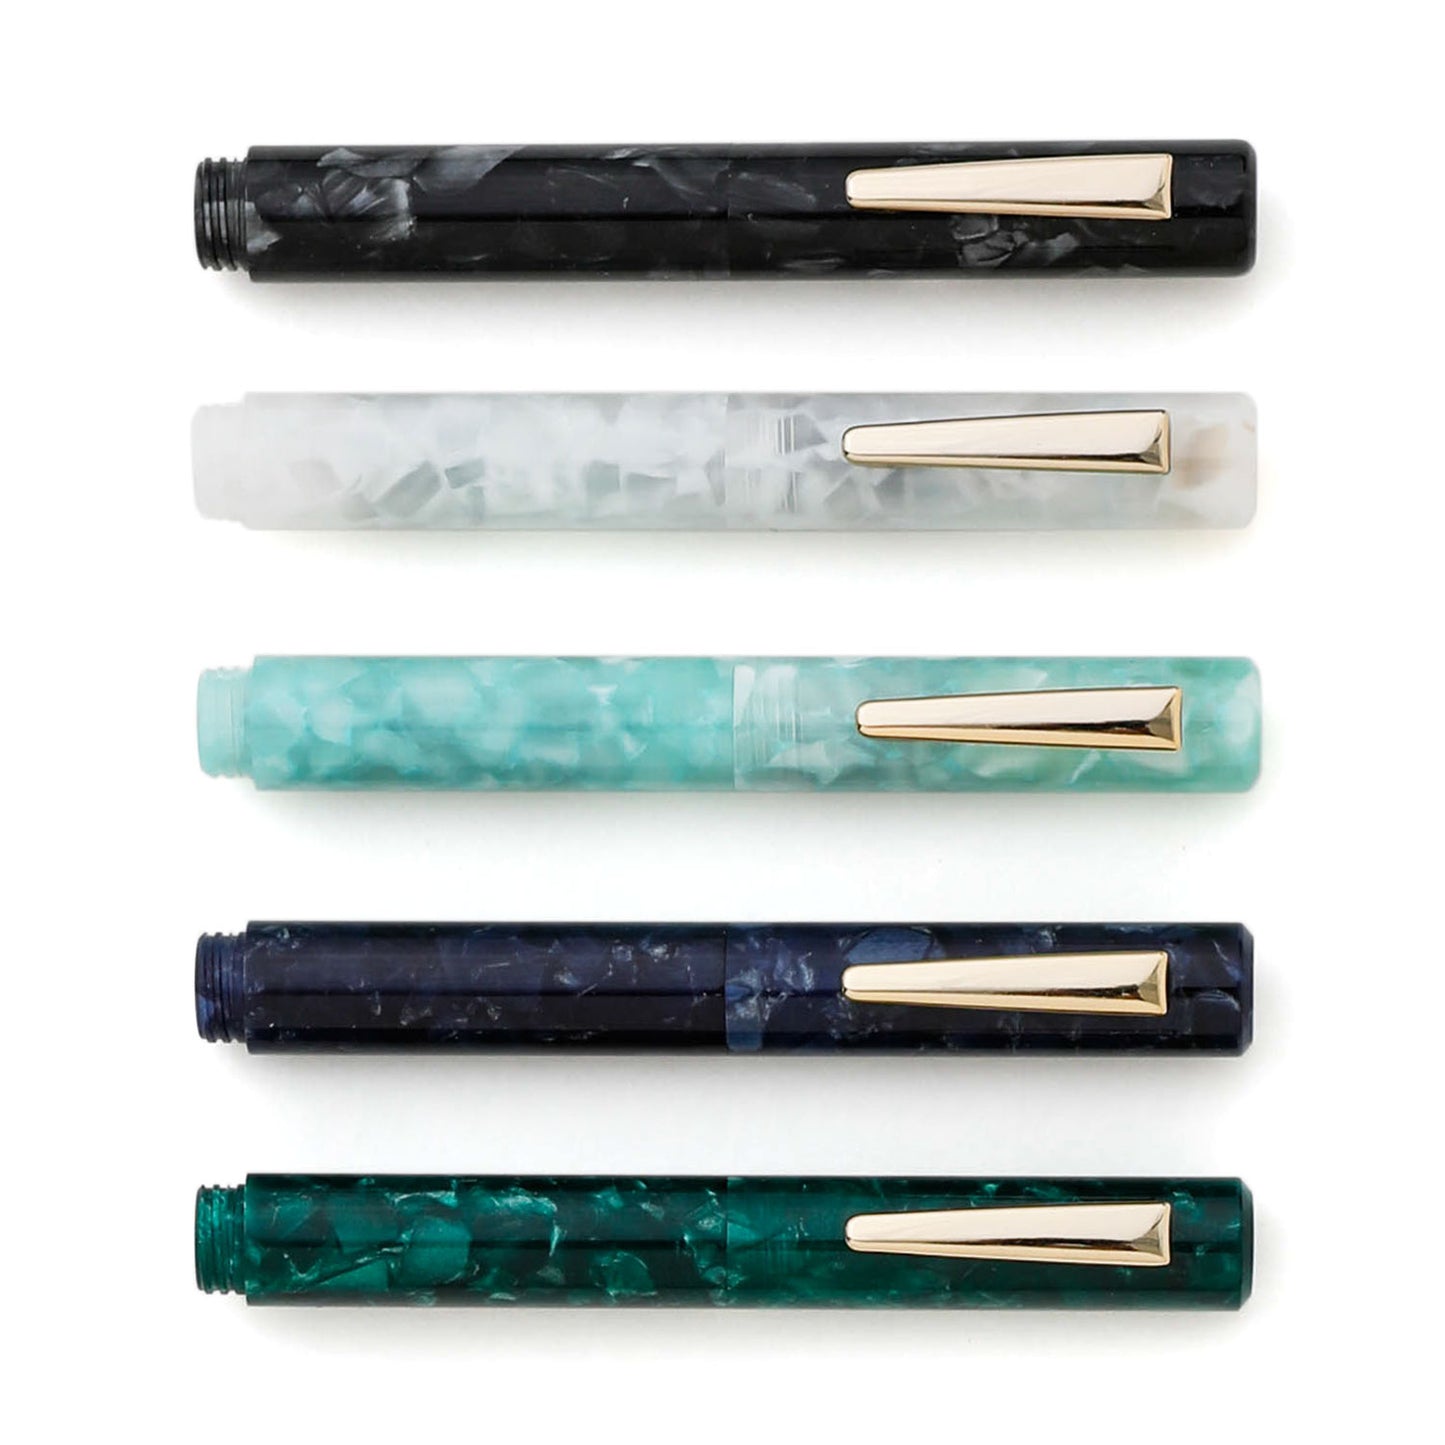 Marbled Fountain Pen